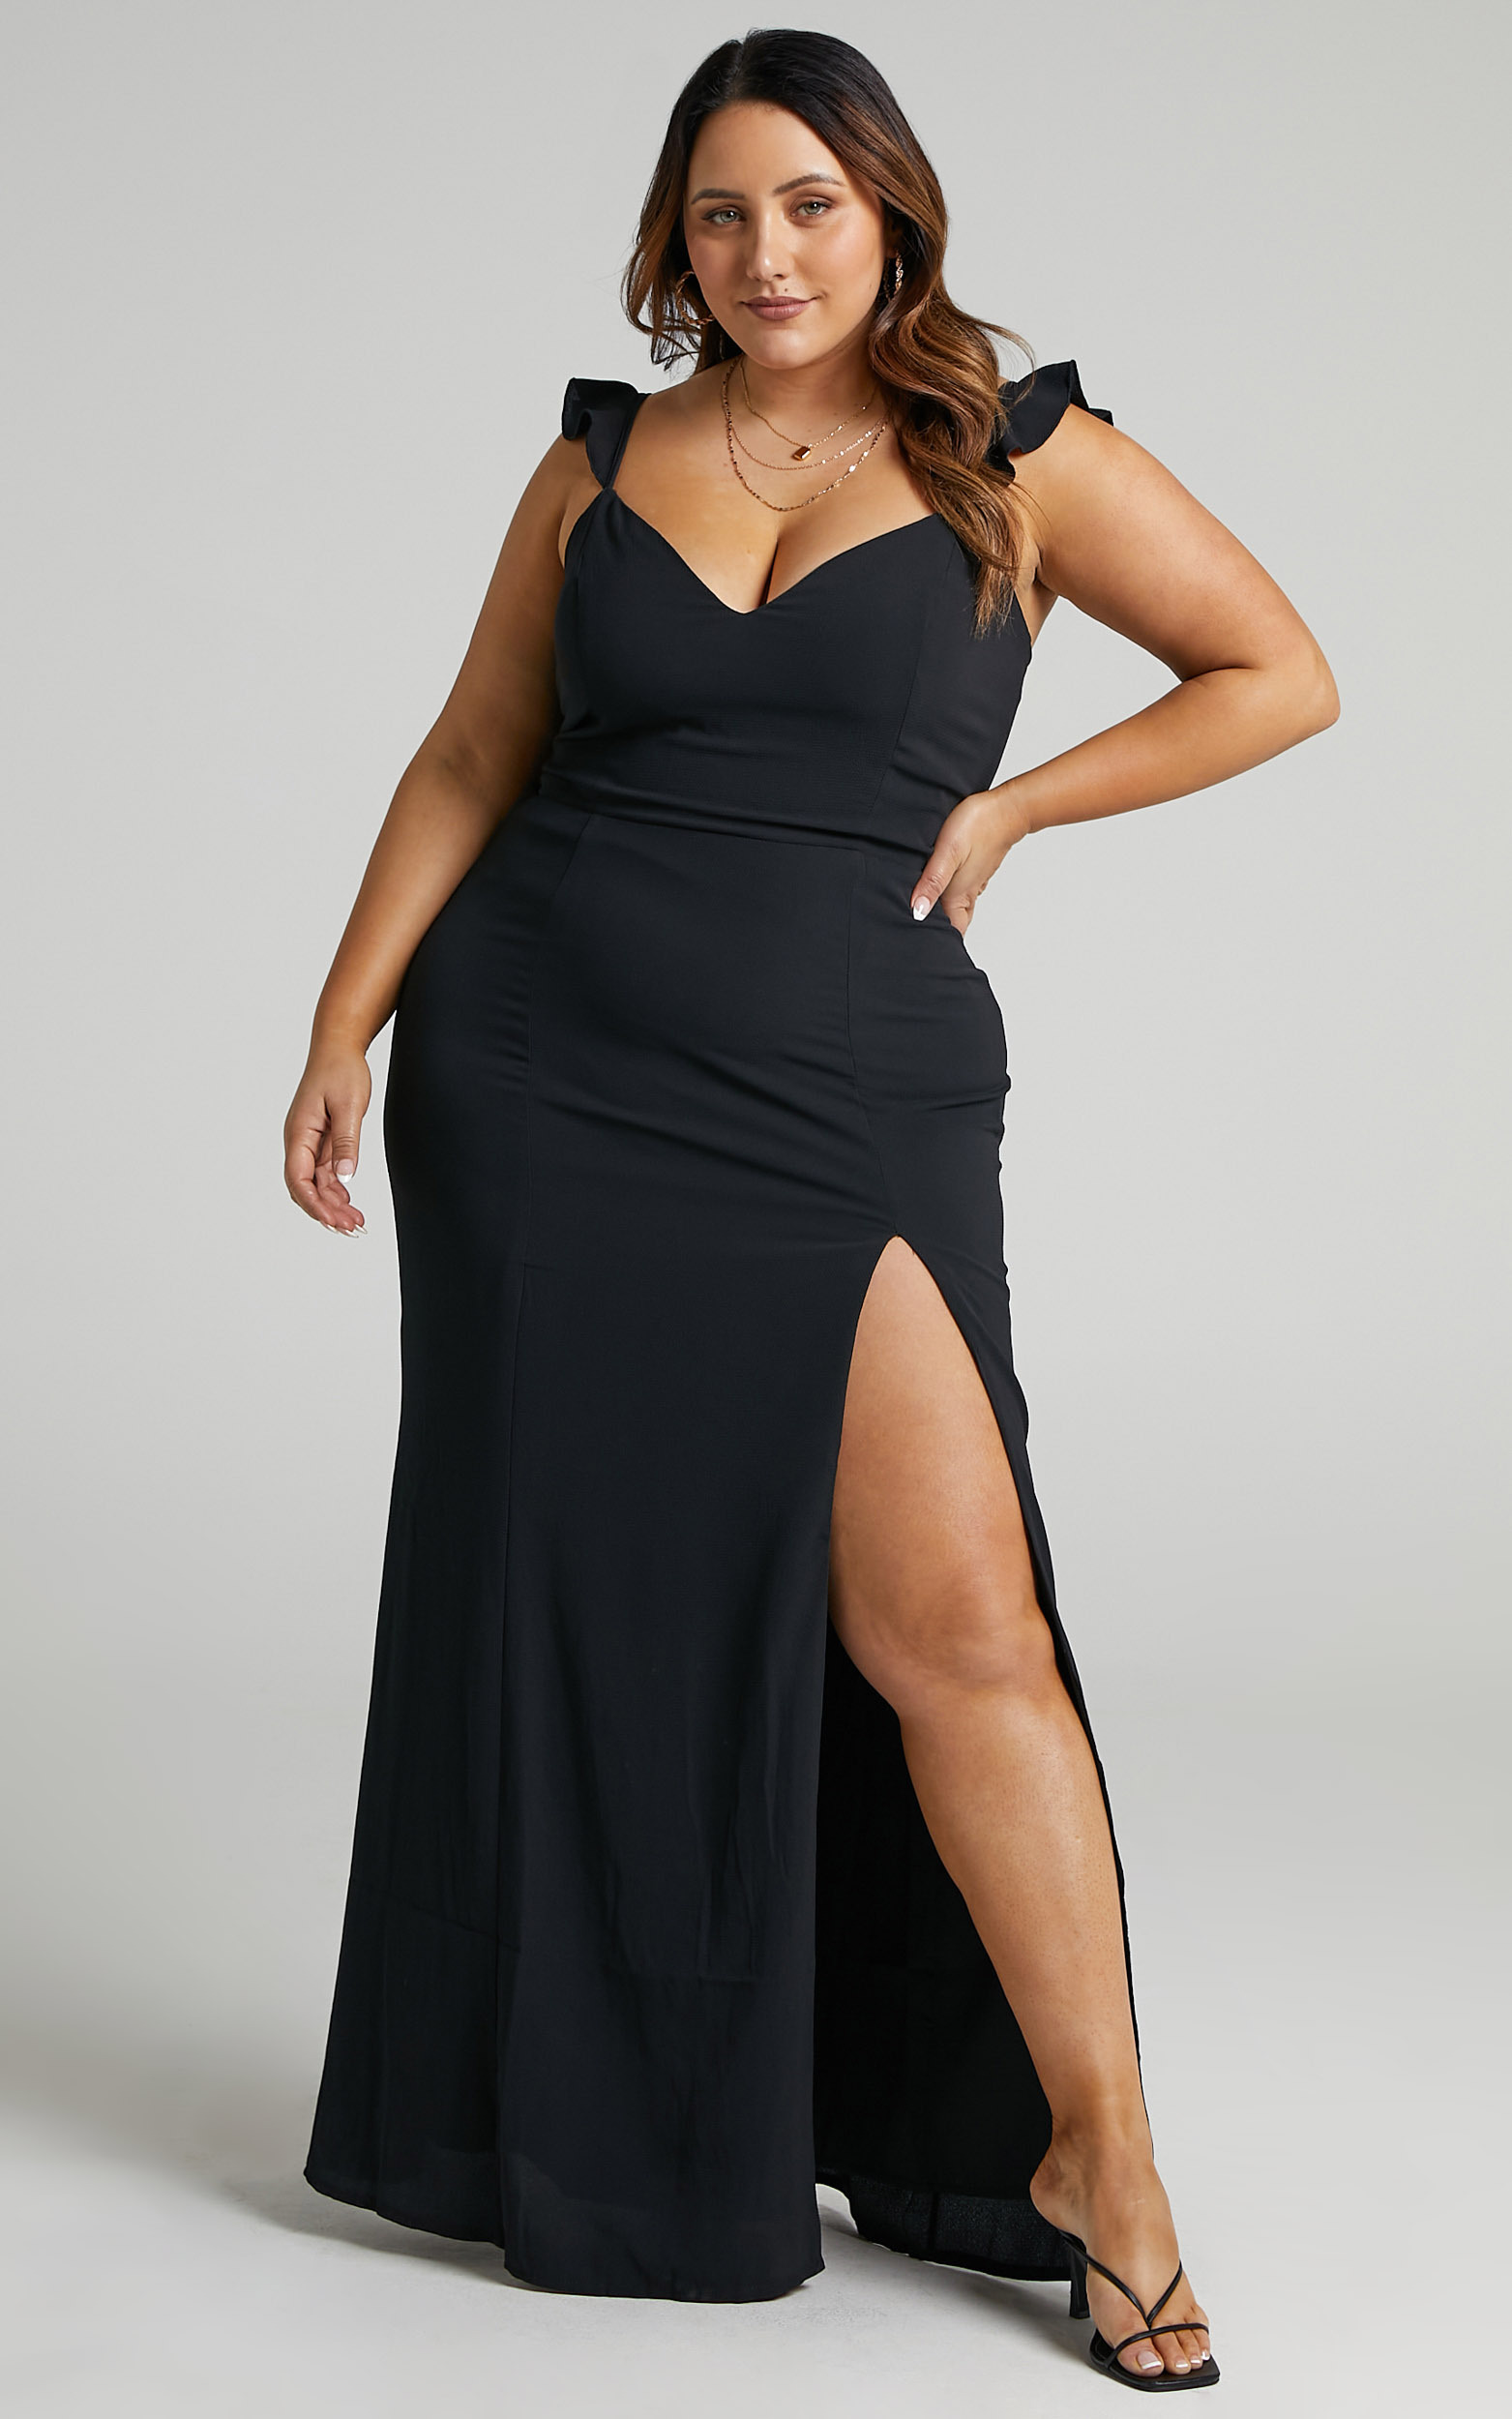 More Than This Ruffle Strap Maxi Dress in Black - 04, BLK1, hi-res image number null